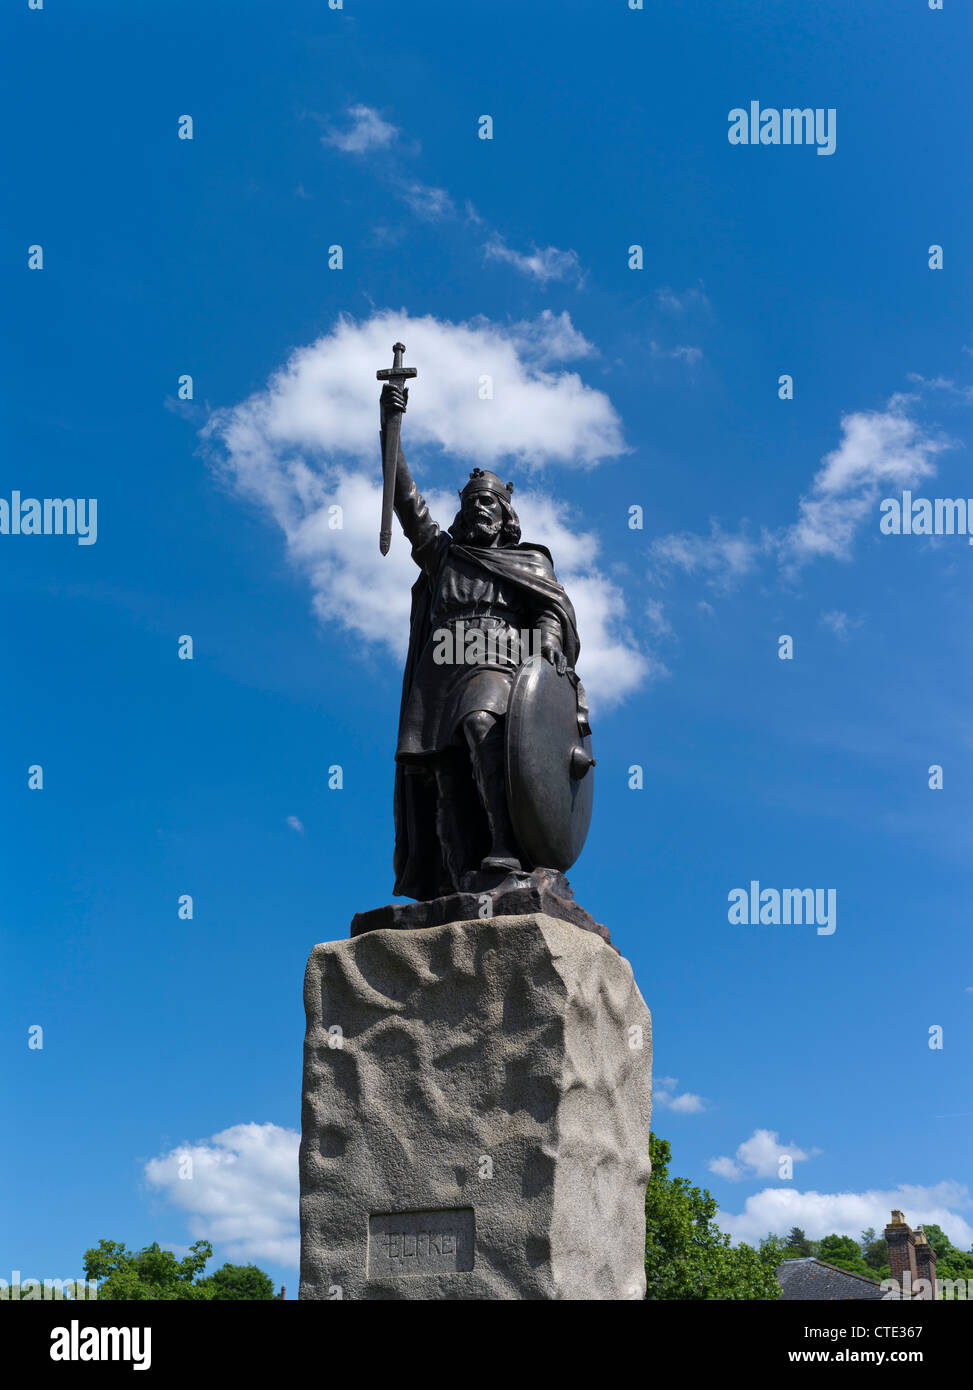 dh King Alfreds statue WINCHESTER HAMPSHIRE Great King Alfred les greats statue historique de l'angleterre monuments Wessex royaume-uni Banque D'Images